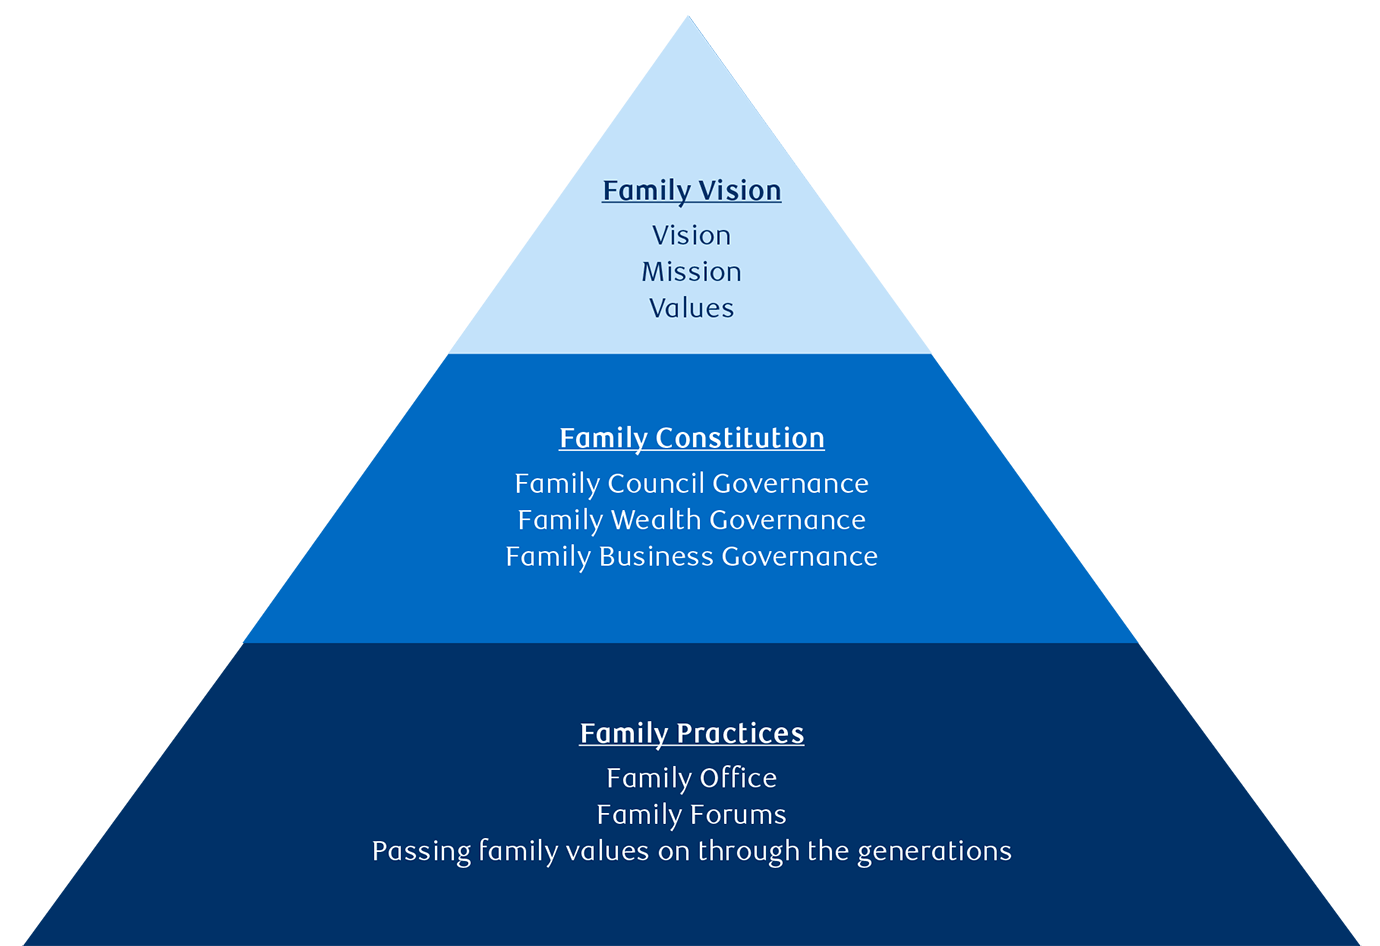 Photo of an example of a family governance model. The top of the pyramid reads, Family Vision with vision, mission and values under the heading. The middle of the pyramid under heading Family Constitution lists Family Council Governance, Family Wealth Governance, and Family Business Governance. The bottom of the pyramid under heading, Family Practices lists Family Office, Family Forums, and Passing family values on through the generations.